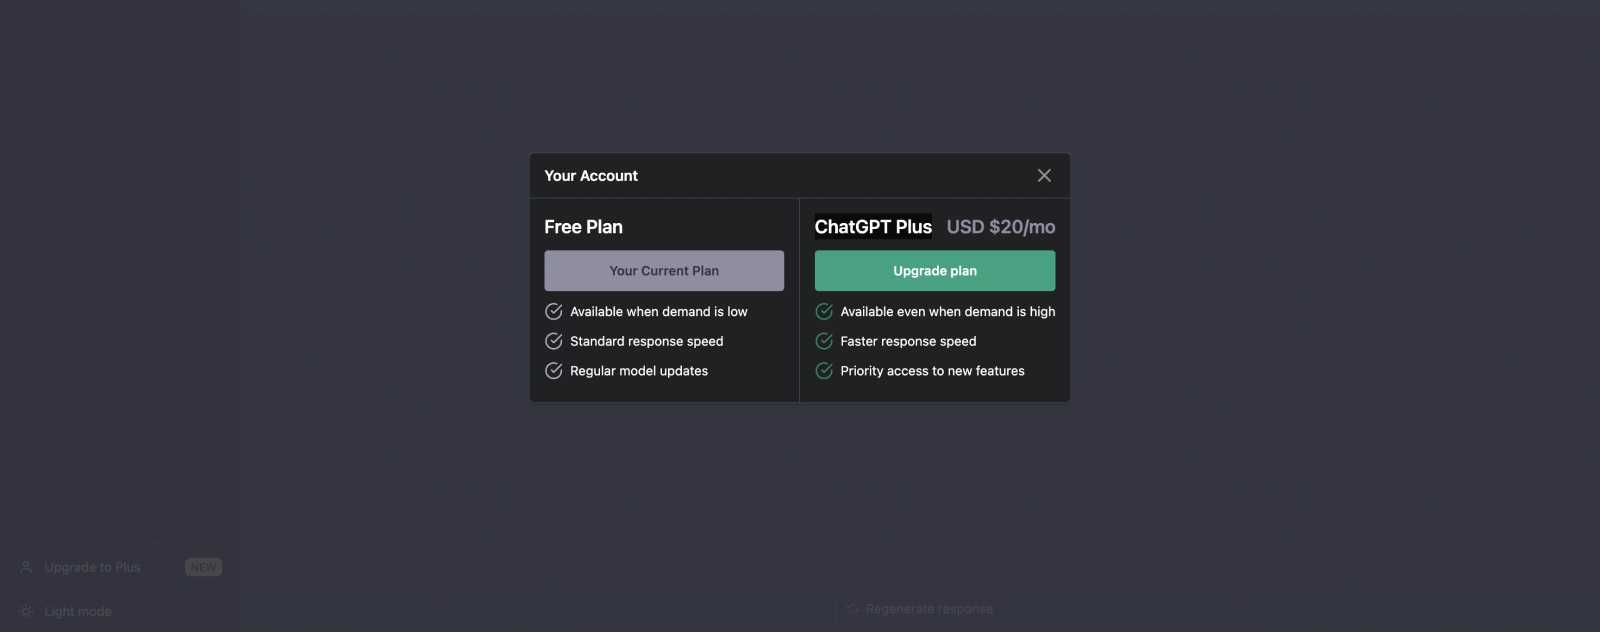 How to get a ChatGPT Plus account?